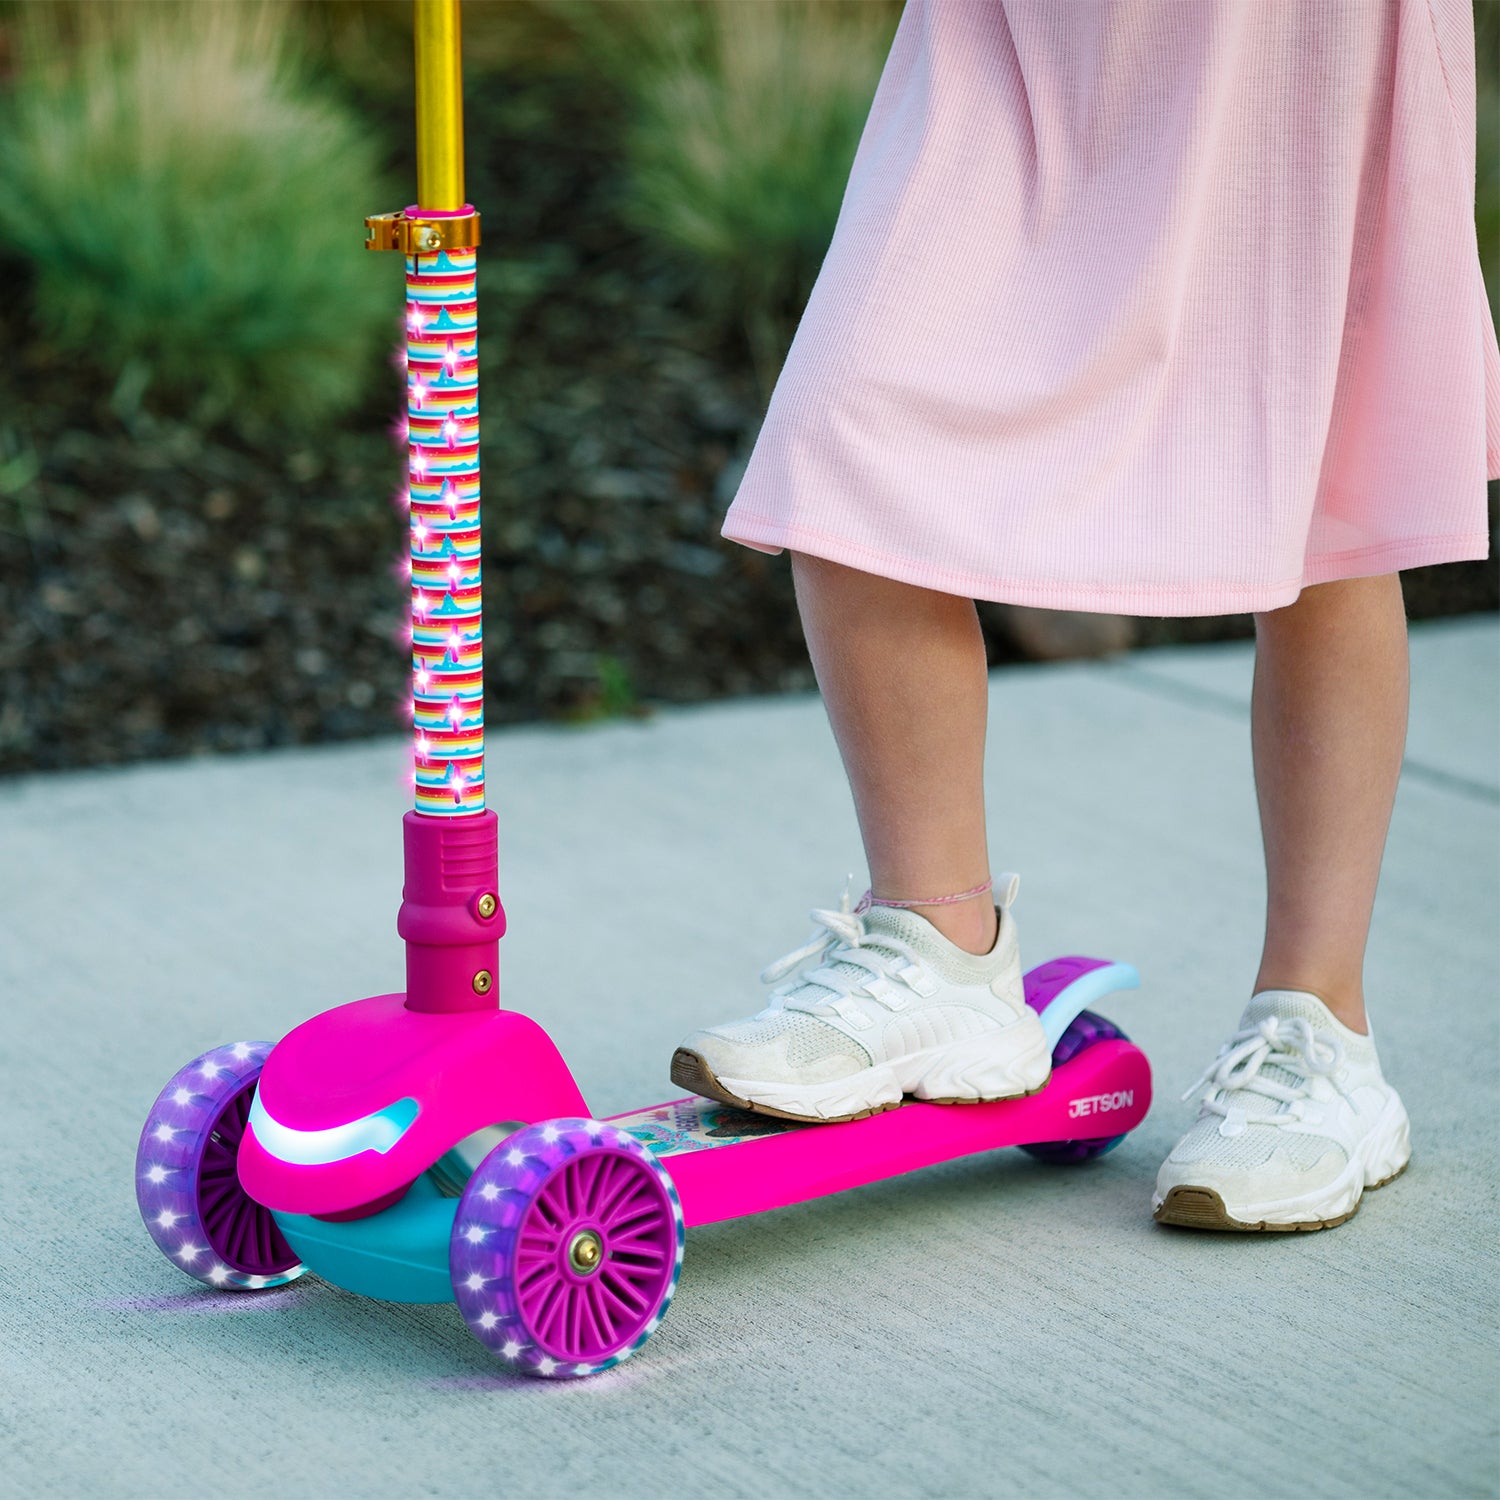 close up of the light up stem and wheels on the disney princess kick scooter